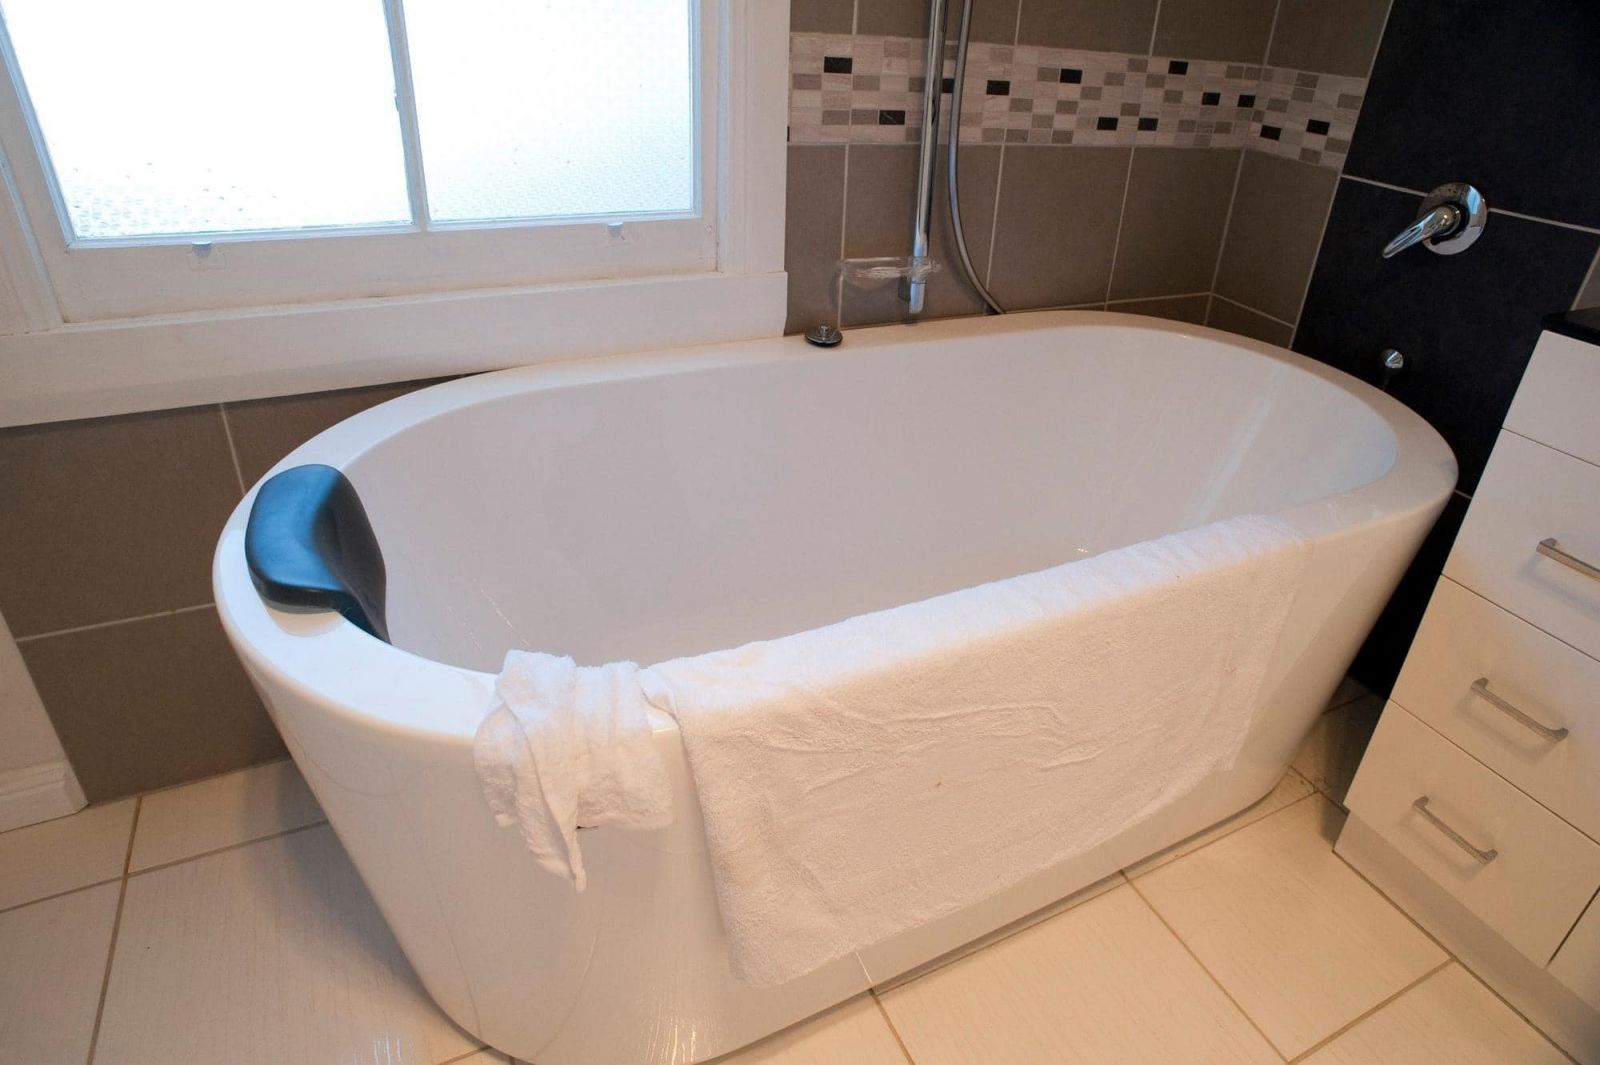 5 Reasons to Choose Bathtub Refinishing Over Replacement